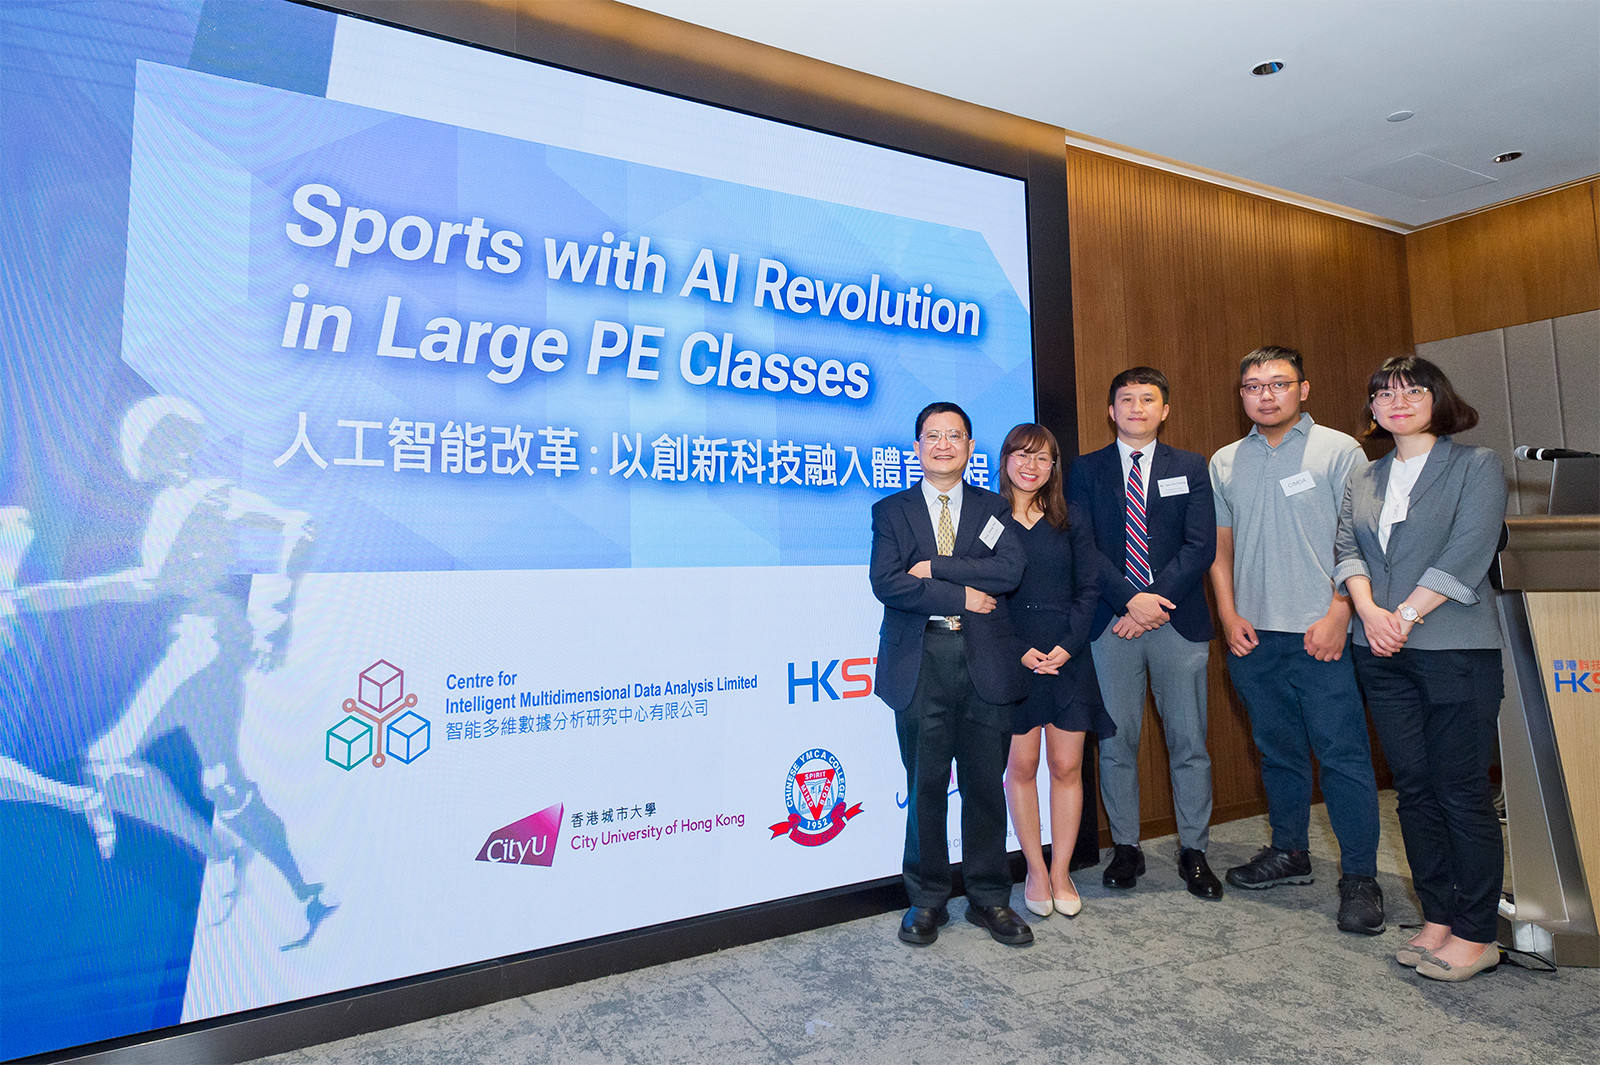 Innovations for physical fitness through AI